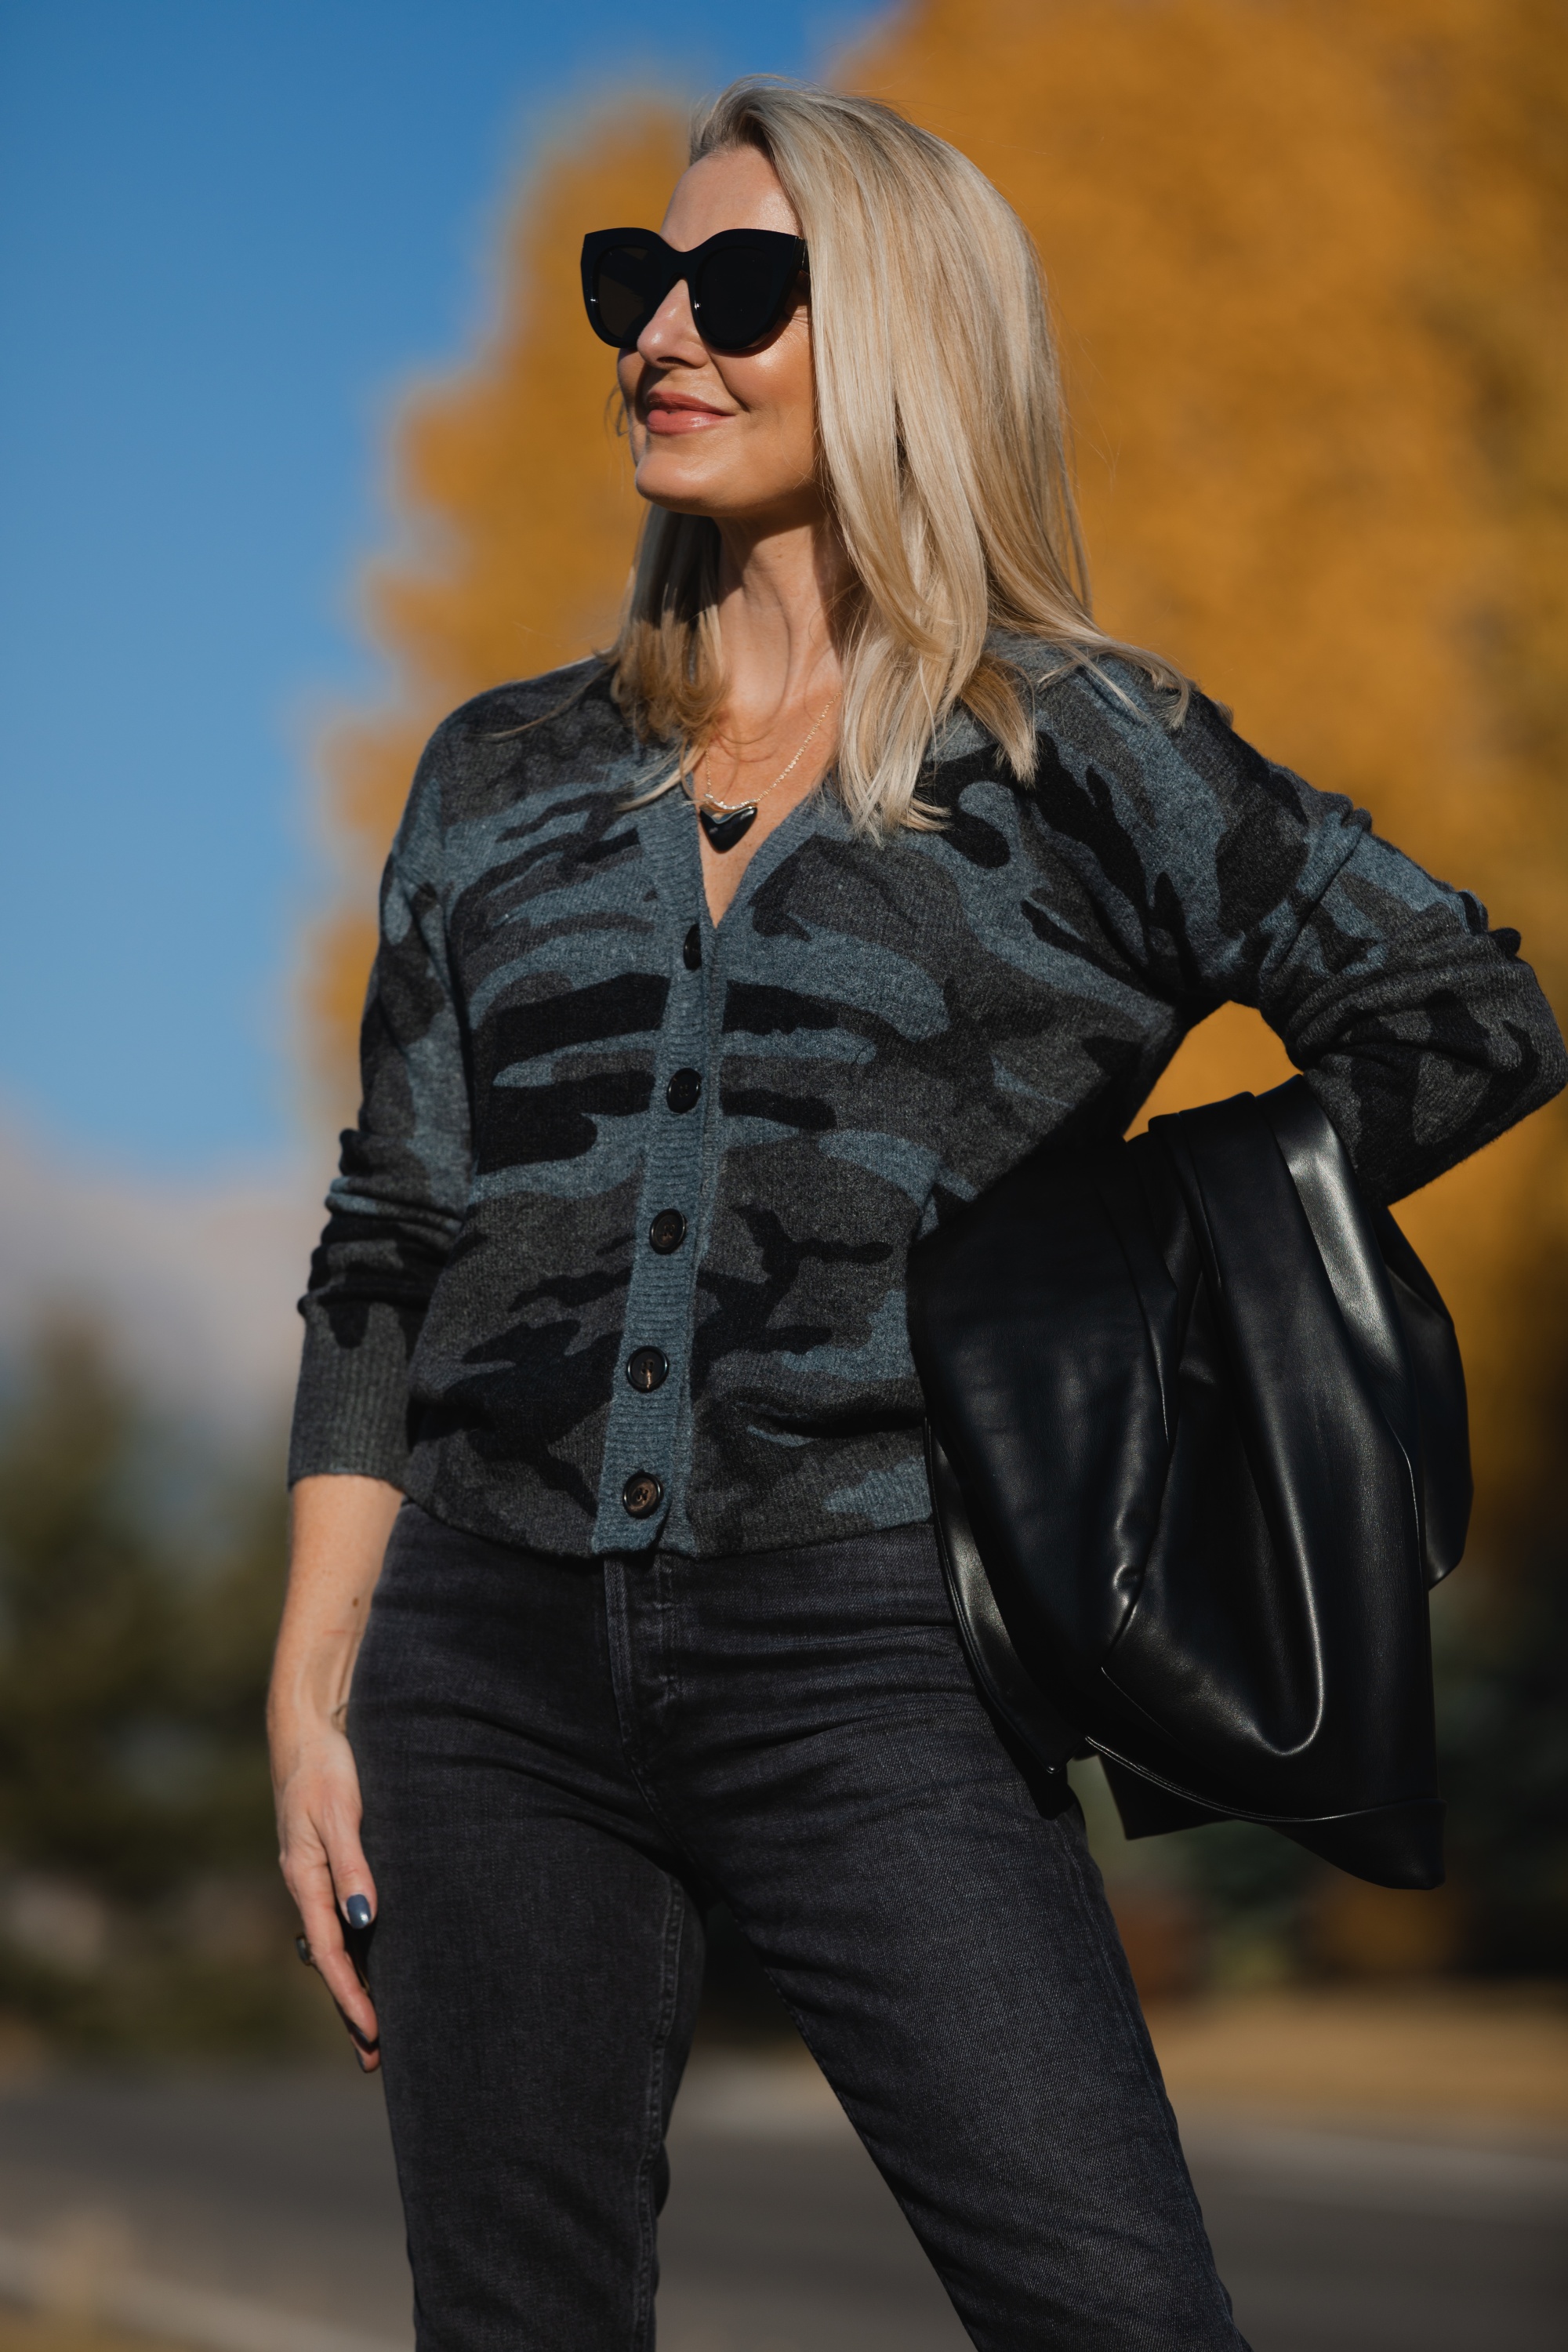 Favorite Fall Jackets, Erin Busbee of Busbee Style holding a black faux leather blazer by Theory and wearing dark gray wash Agolde Nico jeans, black Louise et Cie booties, and Rails camo cardigan sweater in Telluride, Colorado